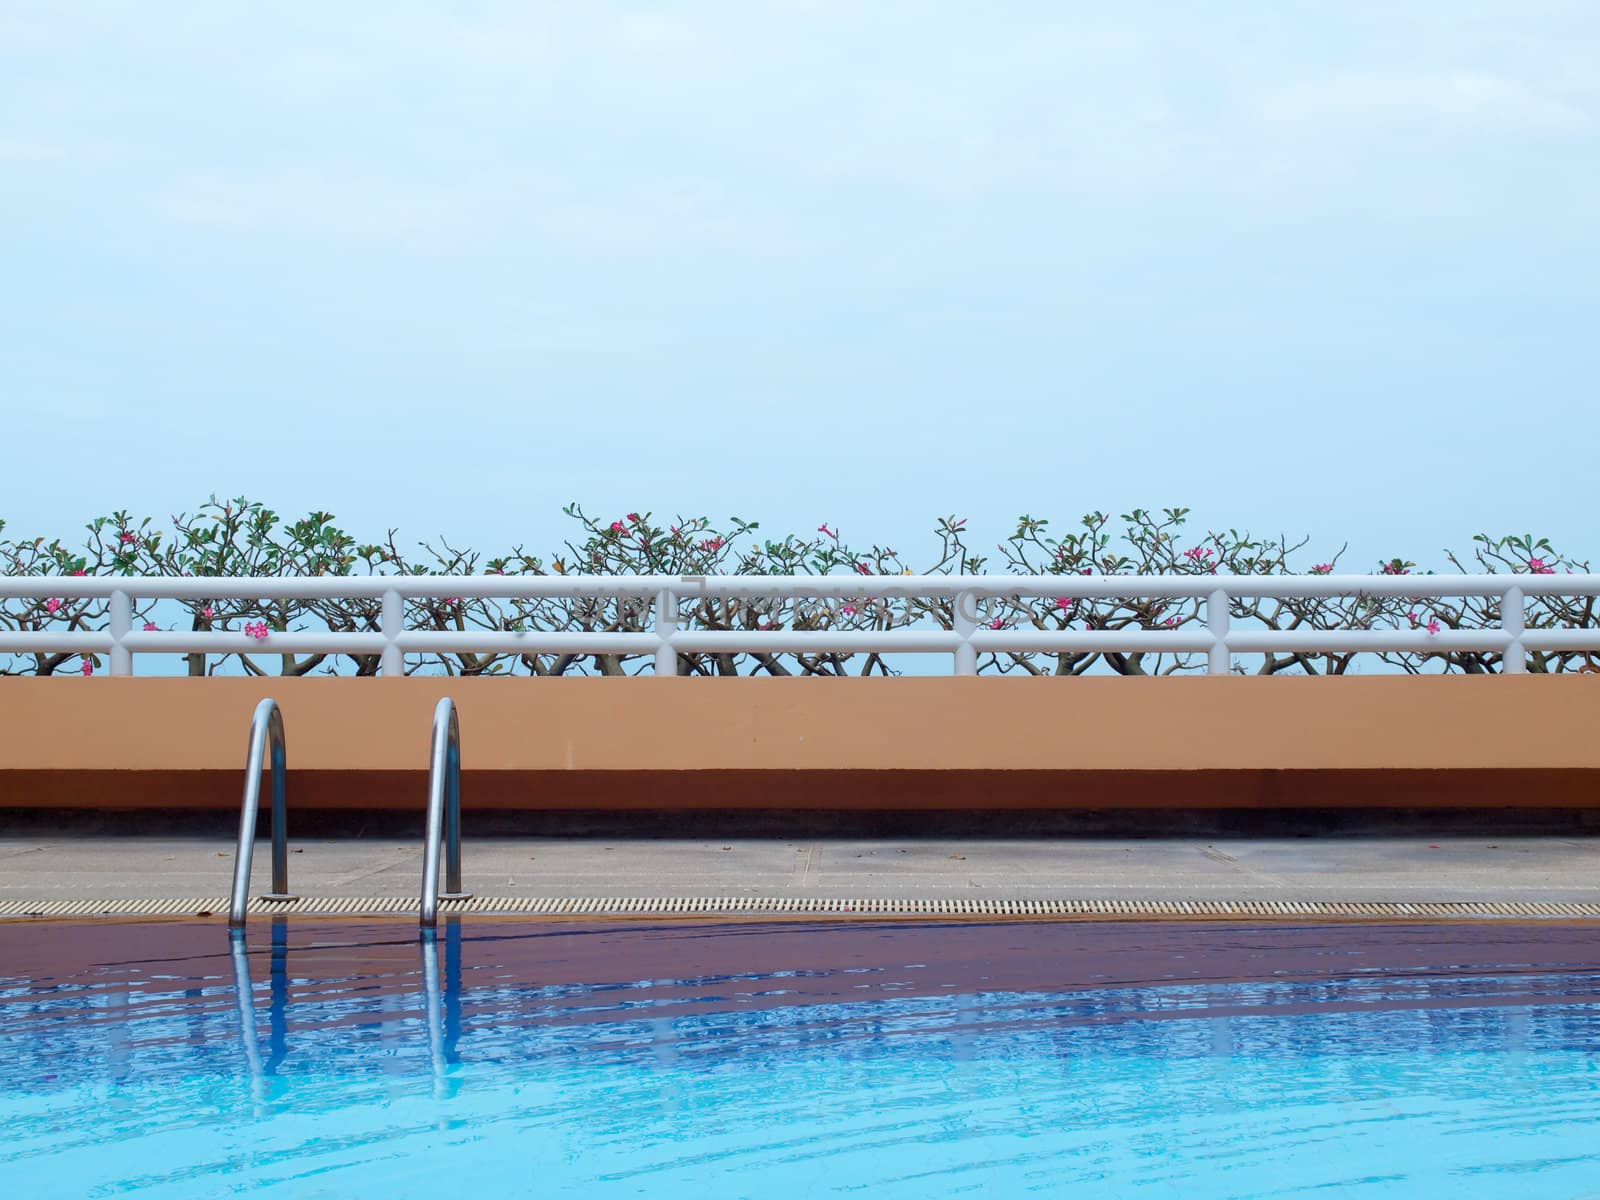 Swimming pool with blue water on terrace of condominium